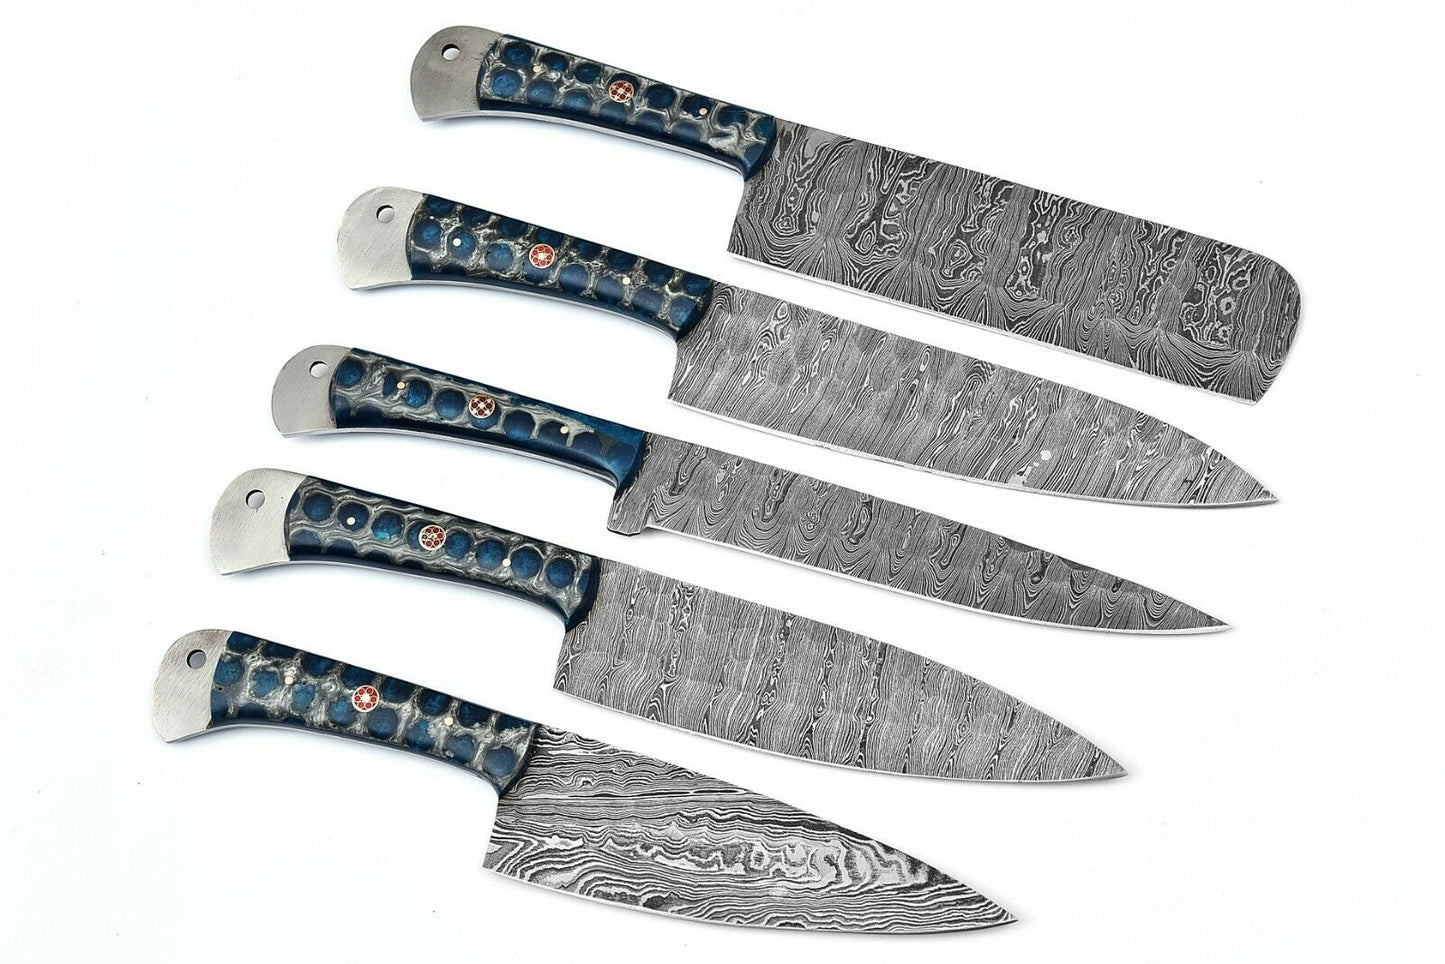 Custom Handmade Chef Knives Set / Kitchen Knives Set / 5Pcs Chef Set / Damascus Blades Chef Knives Set / BBQ Knives Set / Best gift item / Mother Day Gift / Professional Chef For Gift